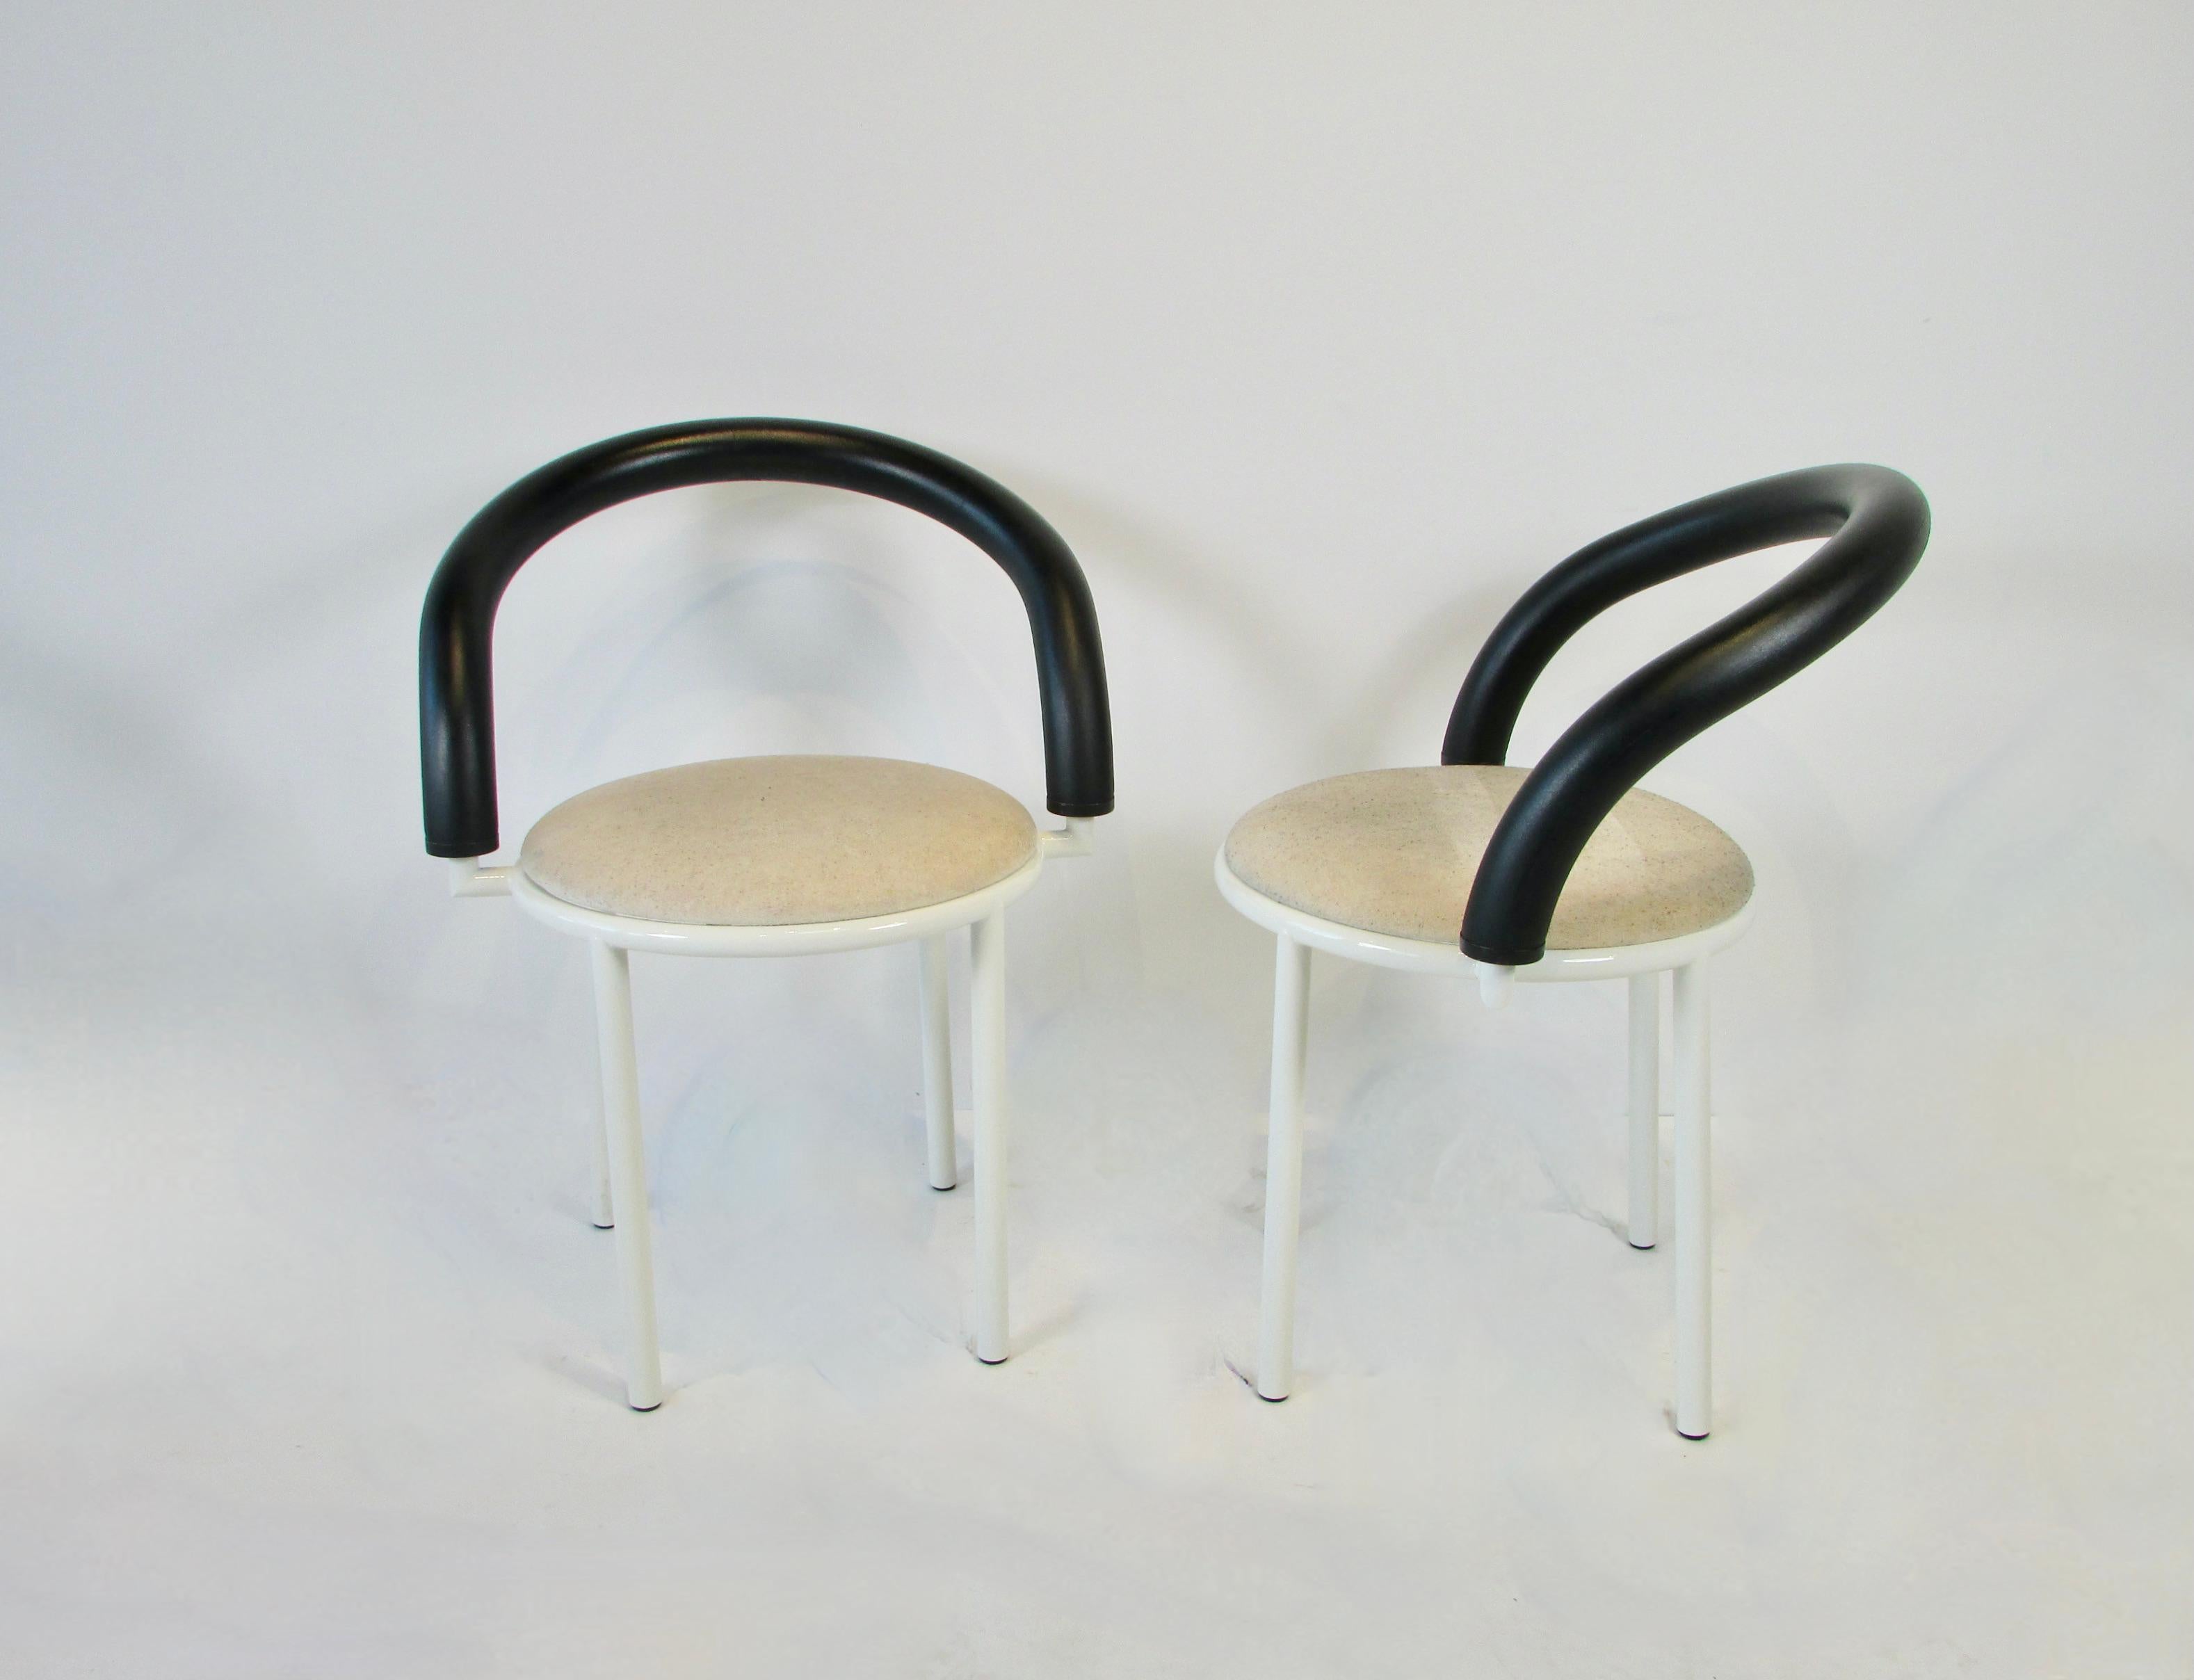 Set of four Memphis era post modern armchairs. Designed by Italian designer Anna Anselmi. Curve around pretzel style arms are covered in dense rubber / foam. Steel bases are finished in white lacquer. Seats are supple foam with a cloth cover still